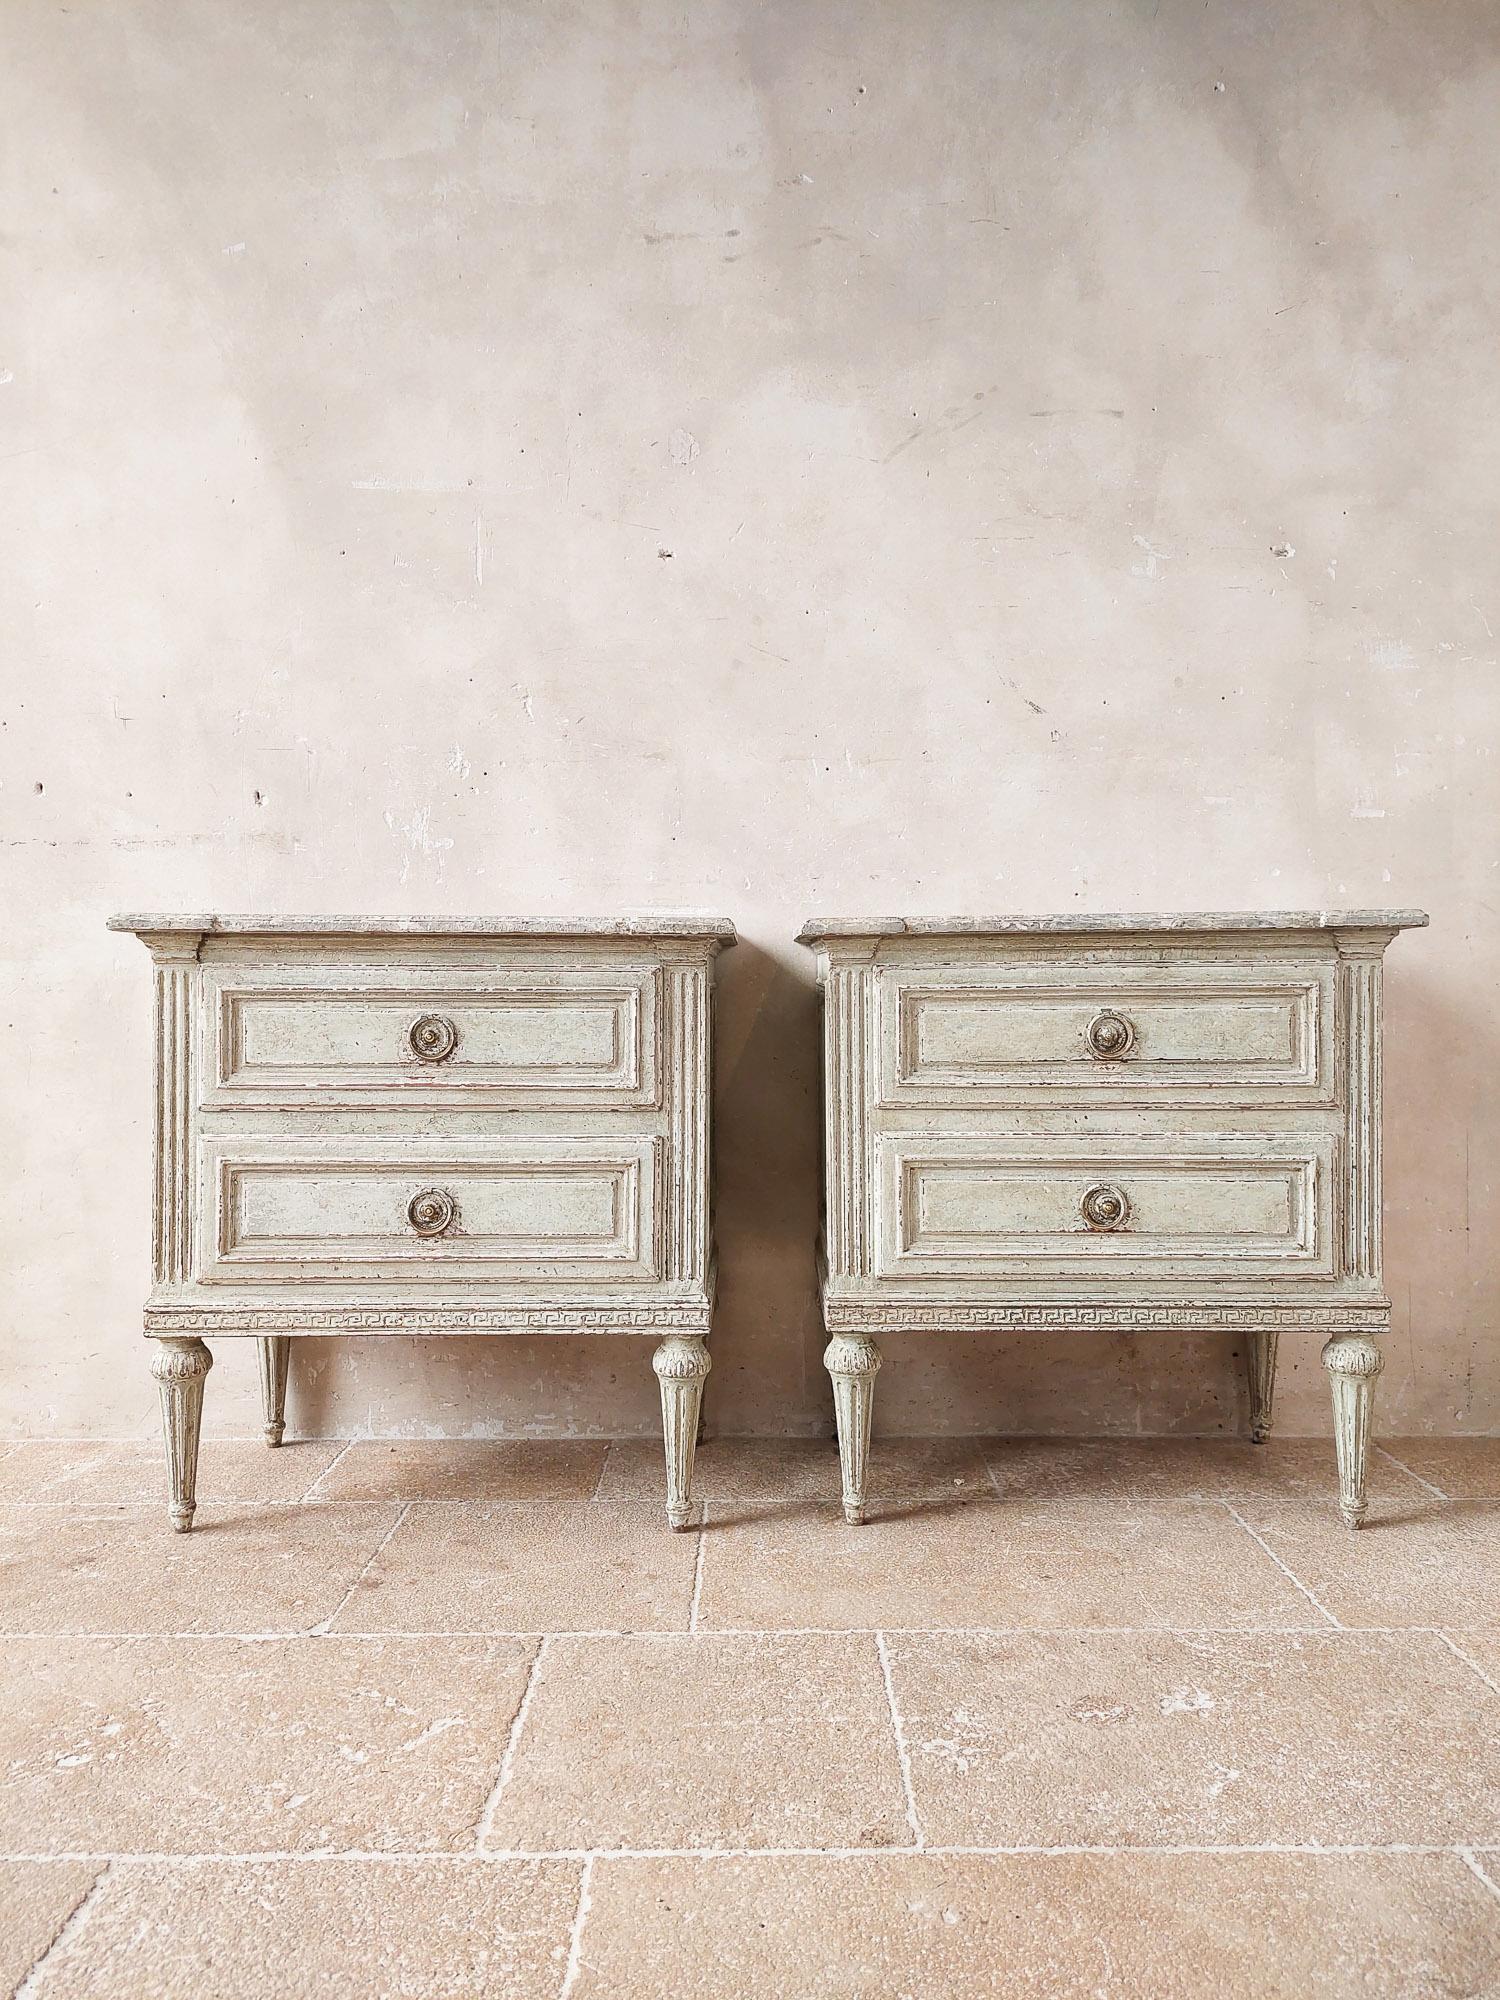 Pair of antique French large bedside tables from 19th century France. These beautiful drawers have an oakwood exterior that has been patinated in an aged grey and with the stunning details on the drawers and legs, these Louis XVI style commodes will